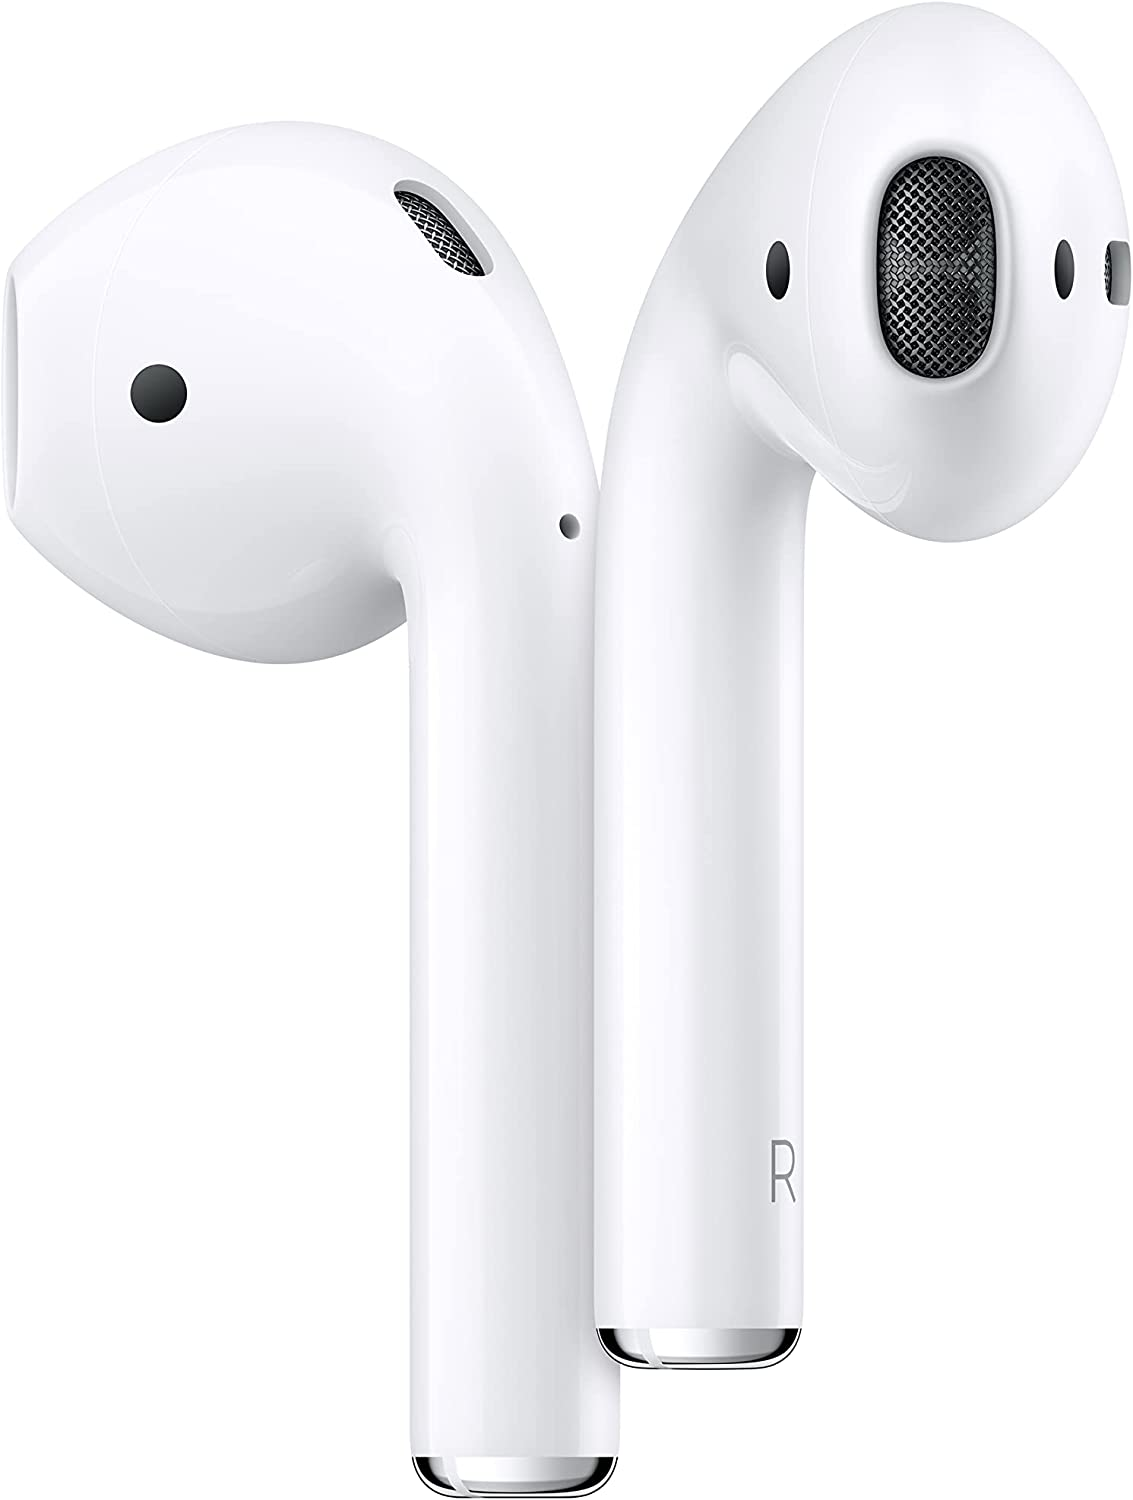 Apple AirPods (2nd Generation) Wireless Earbuds w/ Lightning Charging Case $99.00